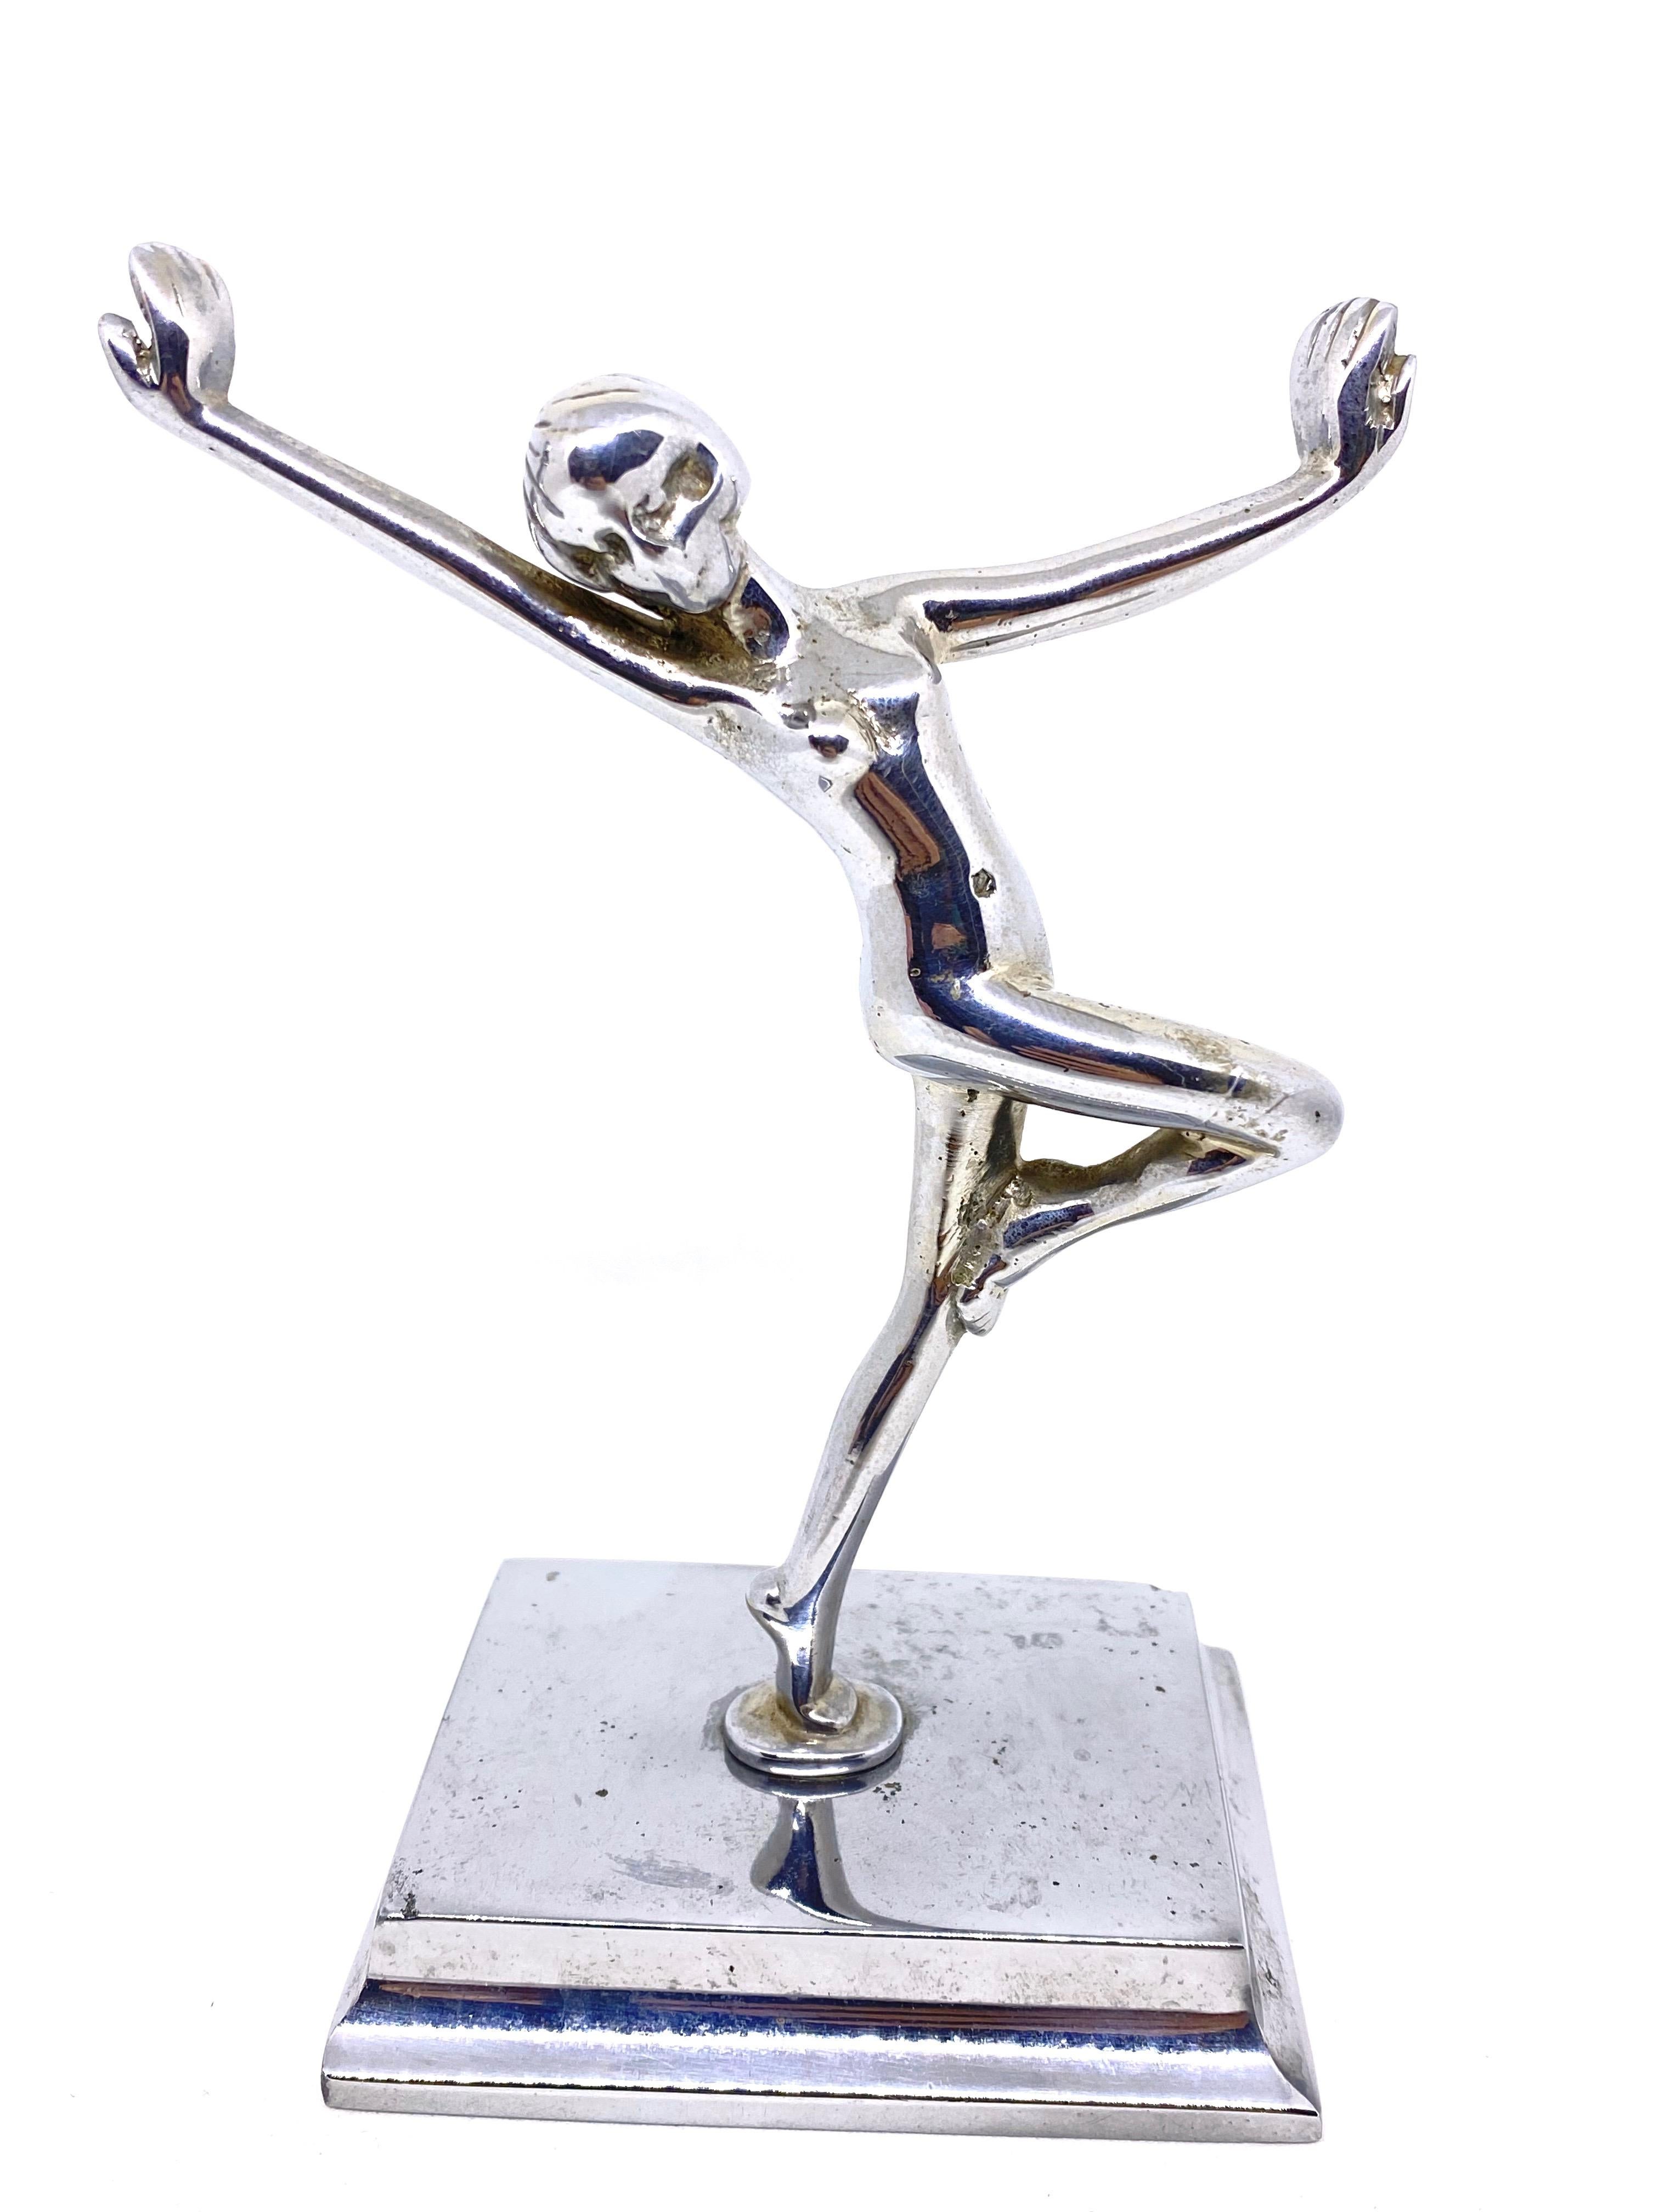 Super cool Art Deco design sculptural nude dancing girl statue. The best addition to your desk or every room. Found at an estate sale in Vienna Austria.